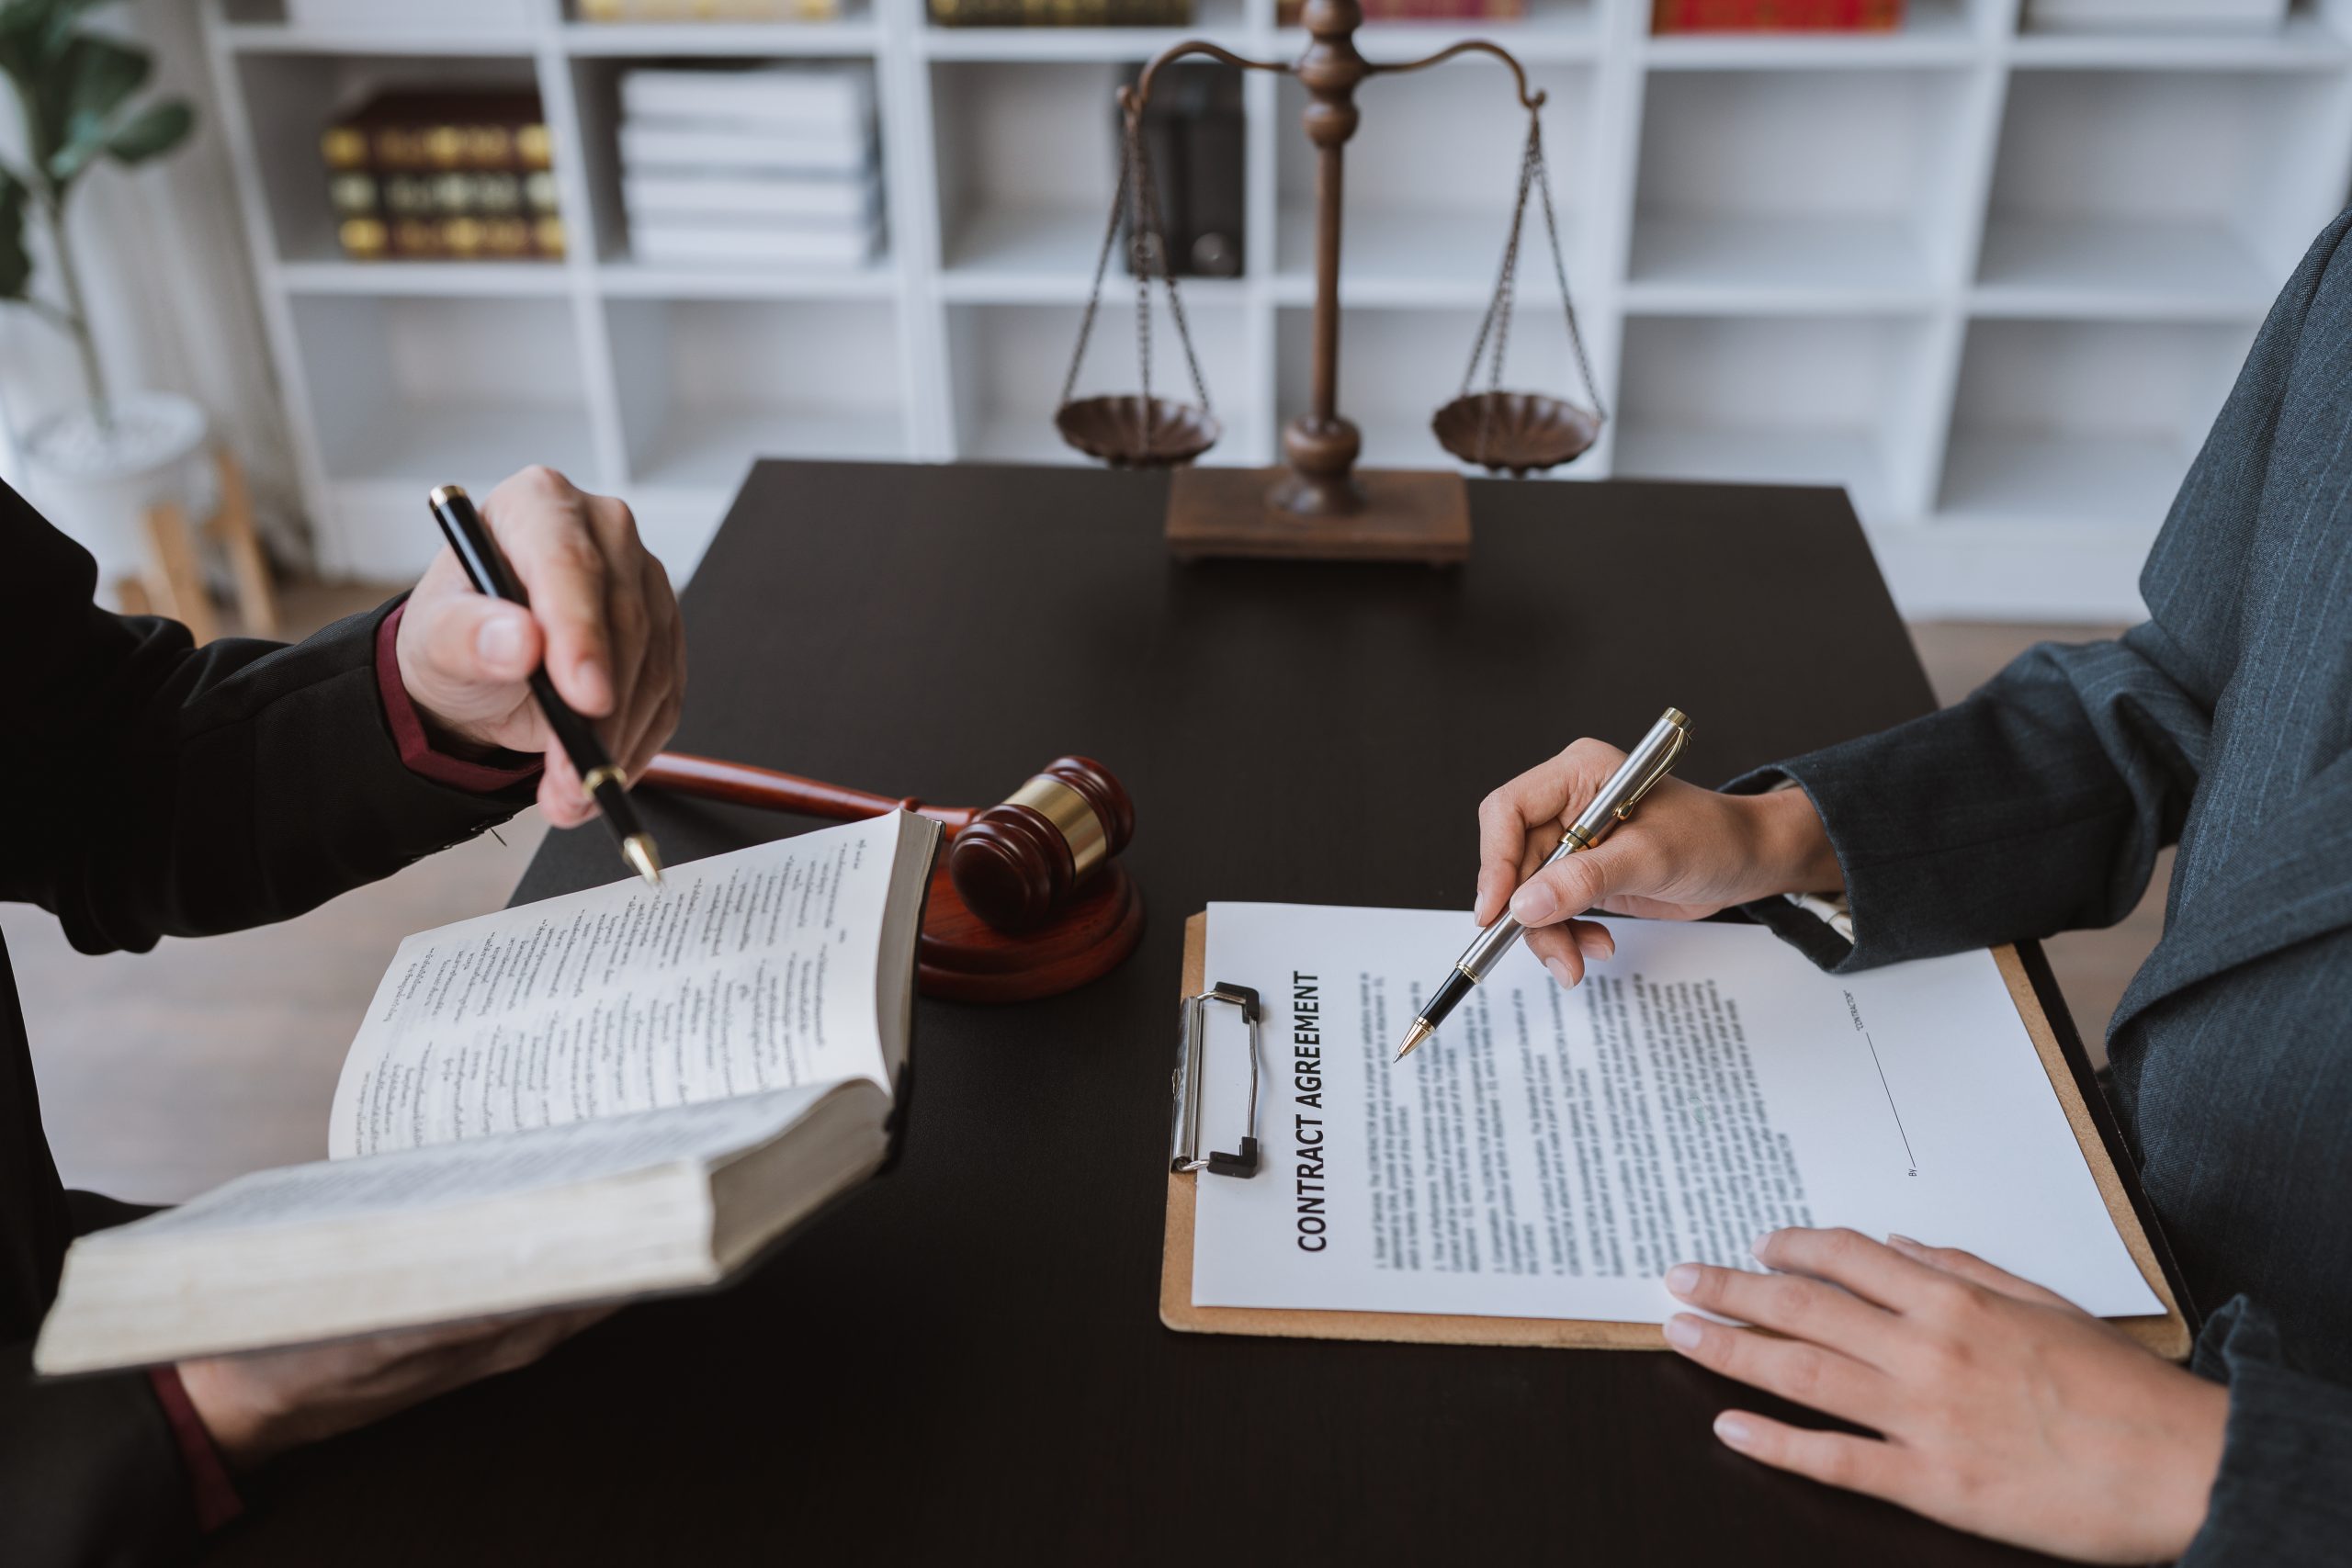 Two people sit at a desk with legal documents. One points at a contract on a clipboard with a pen, while the other holds and writes in a book. A judge’s gavel and scales of justice are visible in the background, emphasizing the importance of timely legal action to meet statutes of limitations.